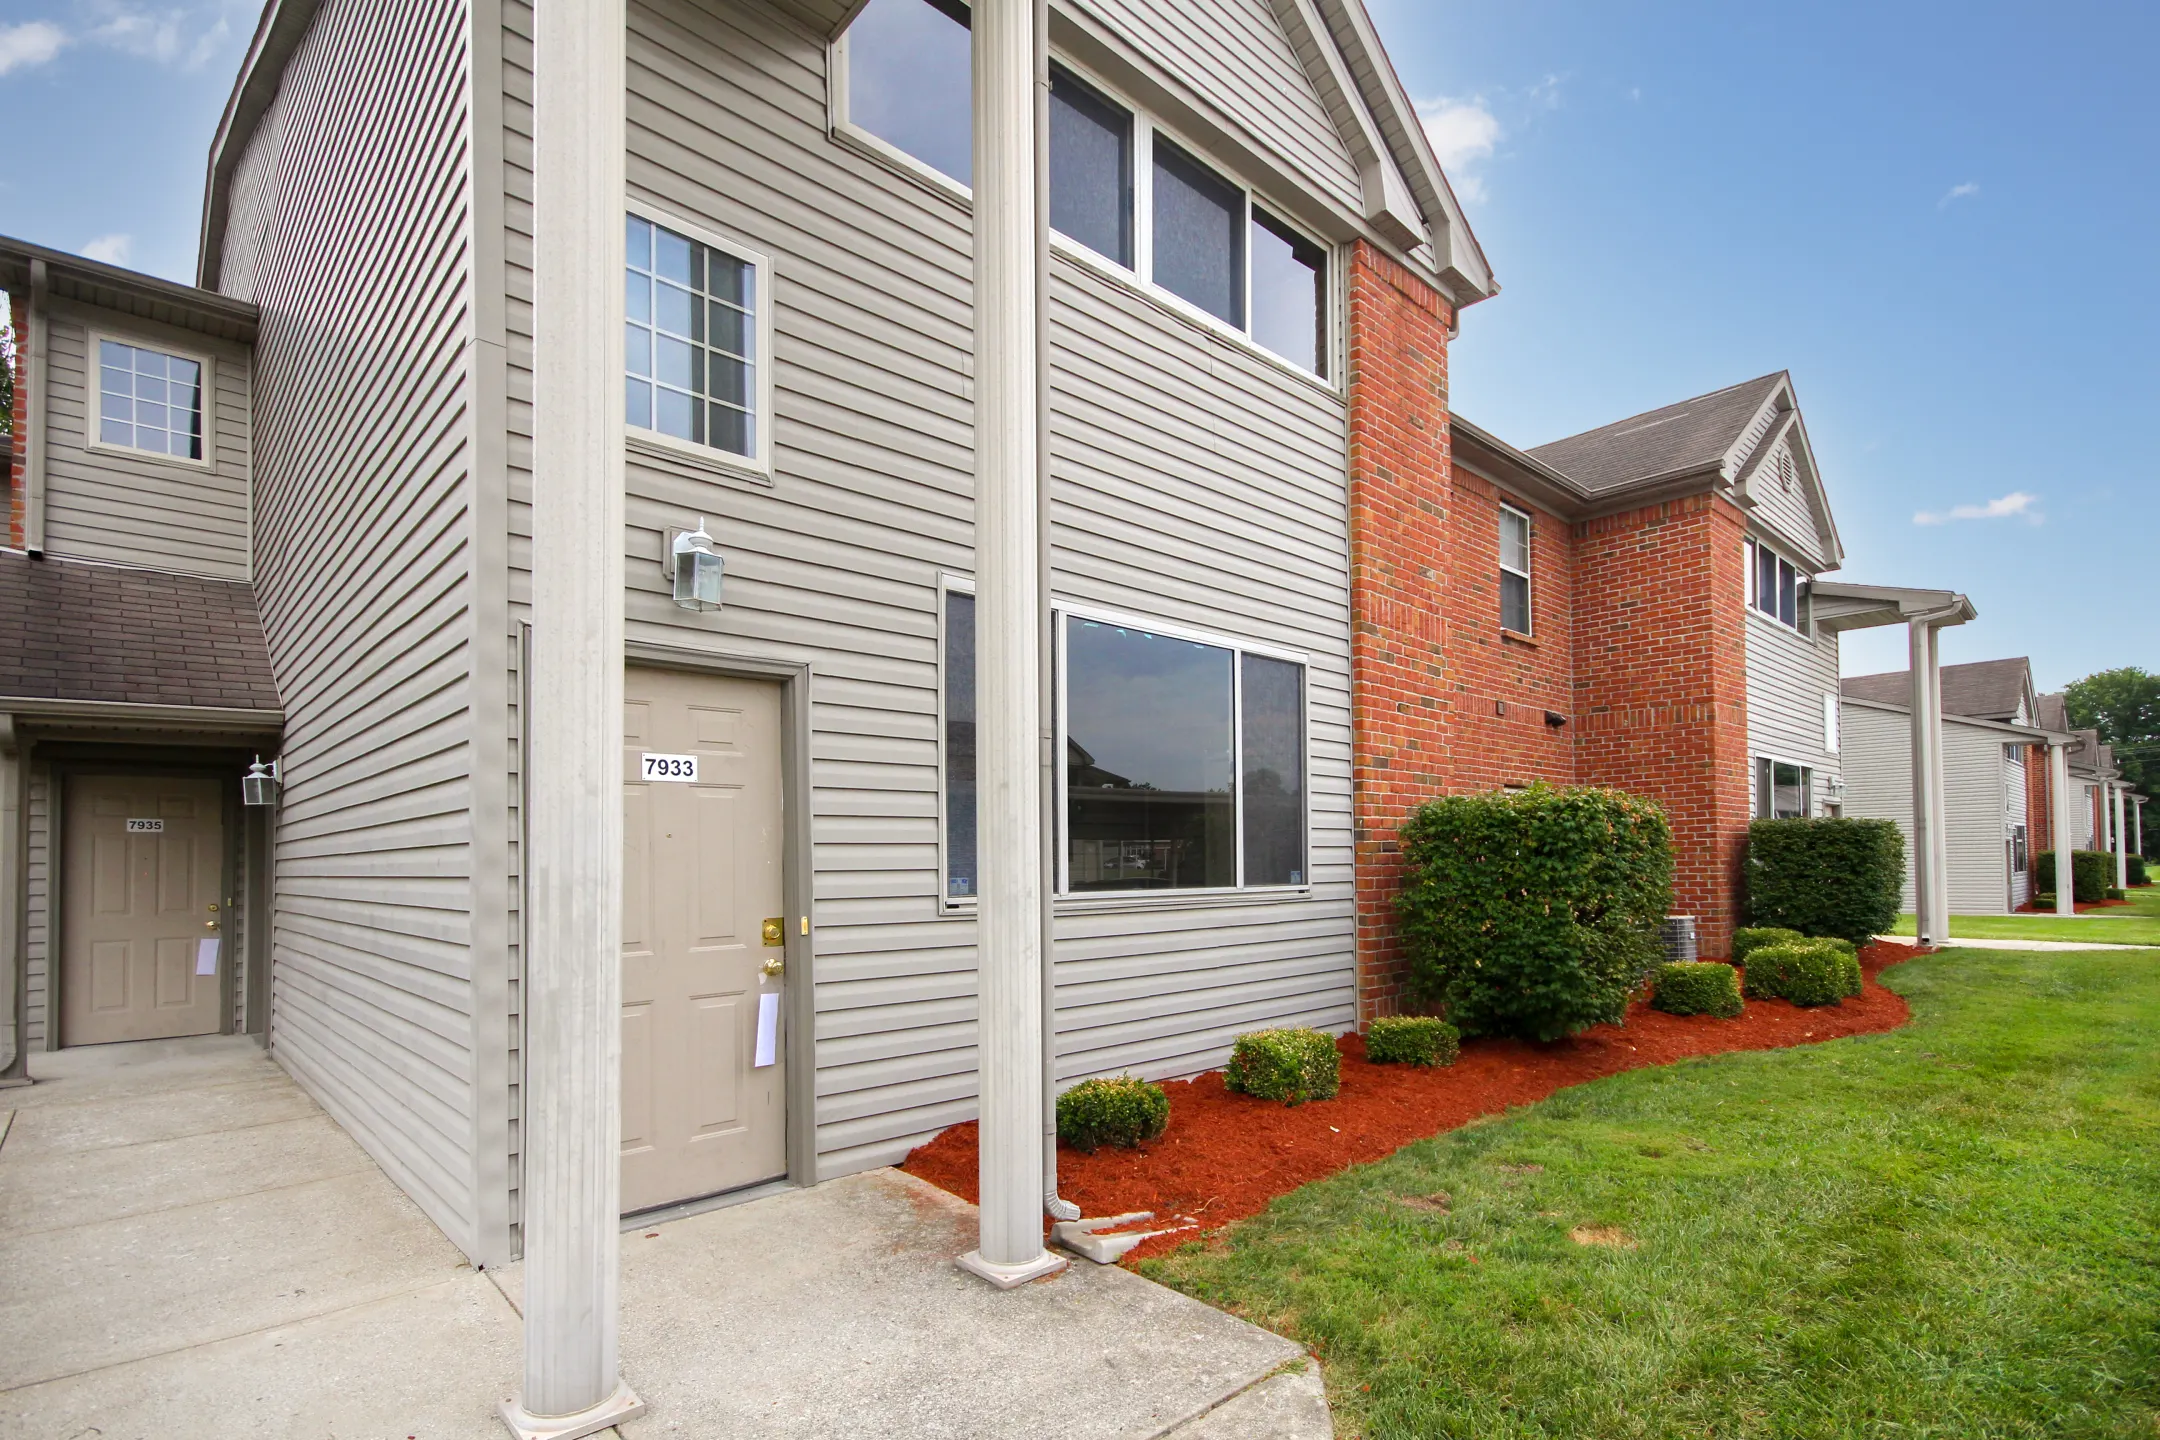 Building - Lakeview Apartments - Sellersburg, IN